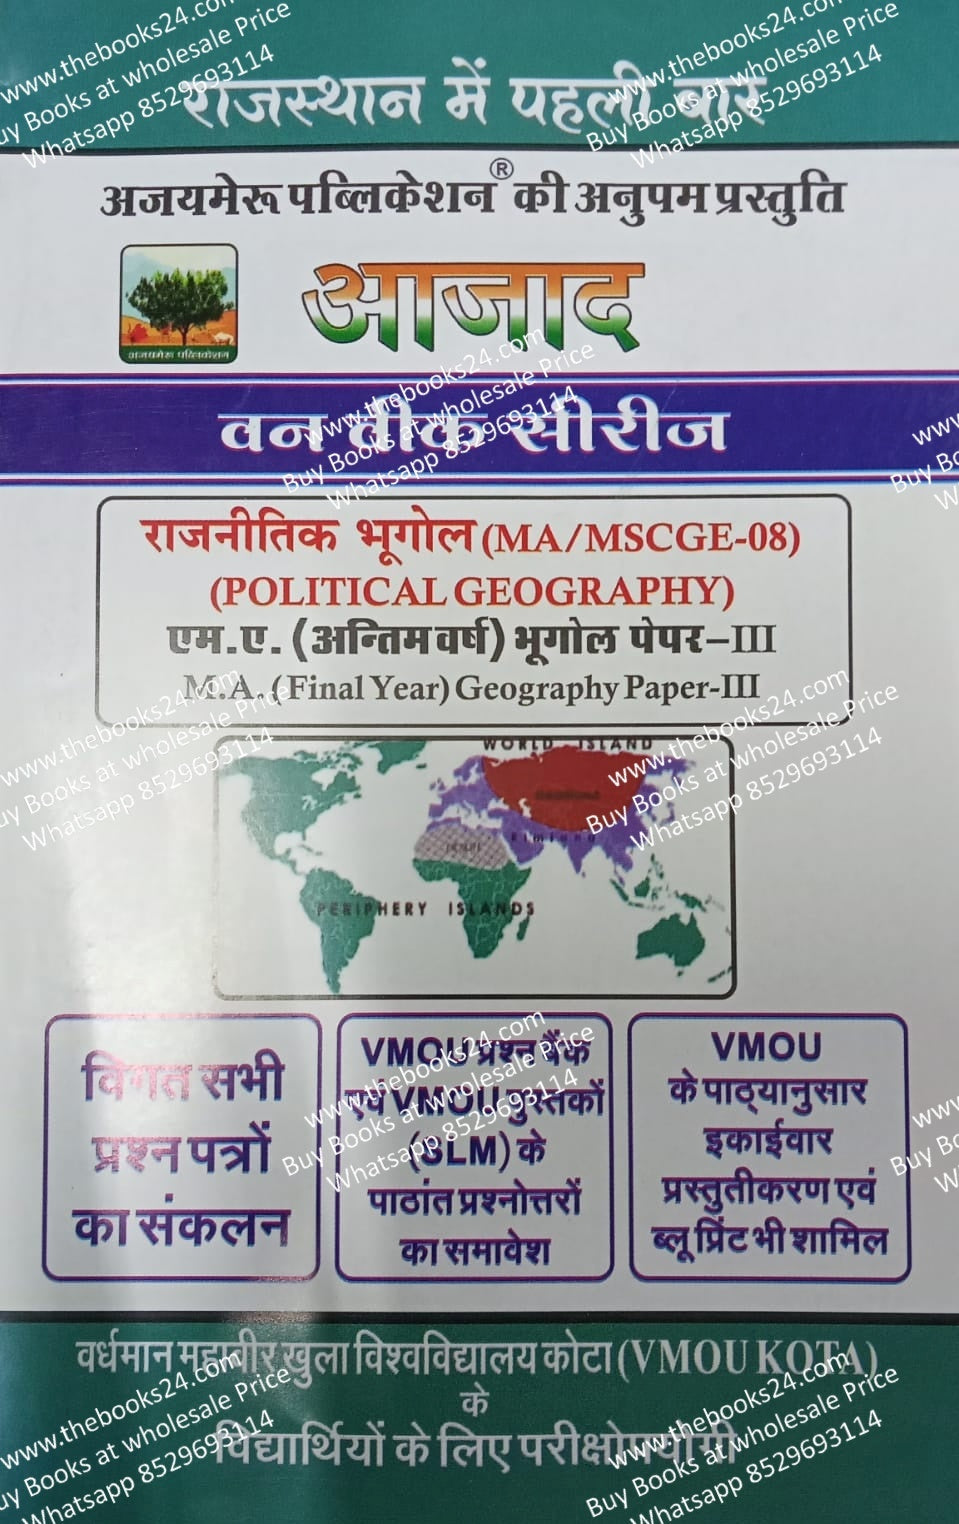 Azad VMOU Kota M.A (Final year) Geography Paper-III Political Geography (MA/MSCGE-08)